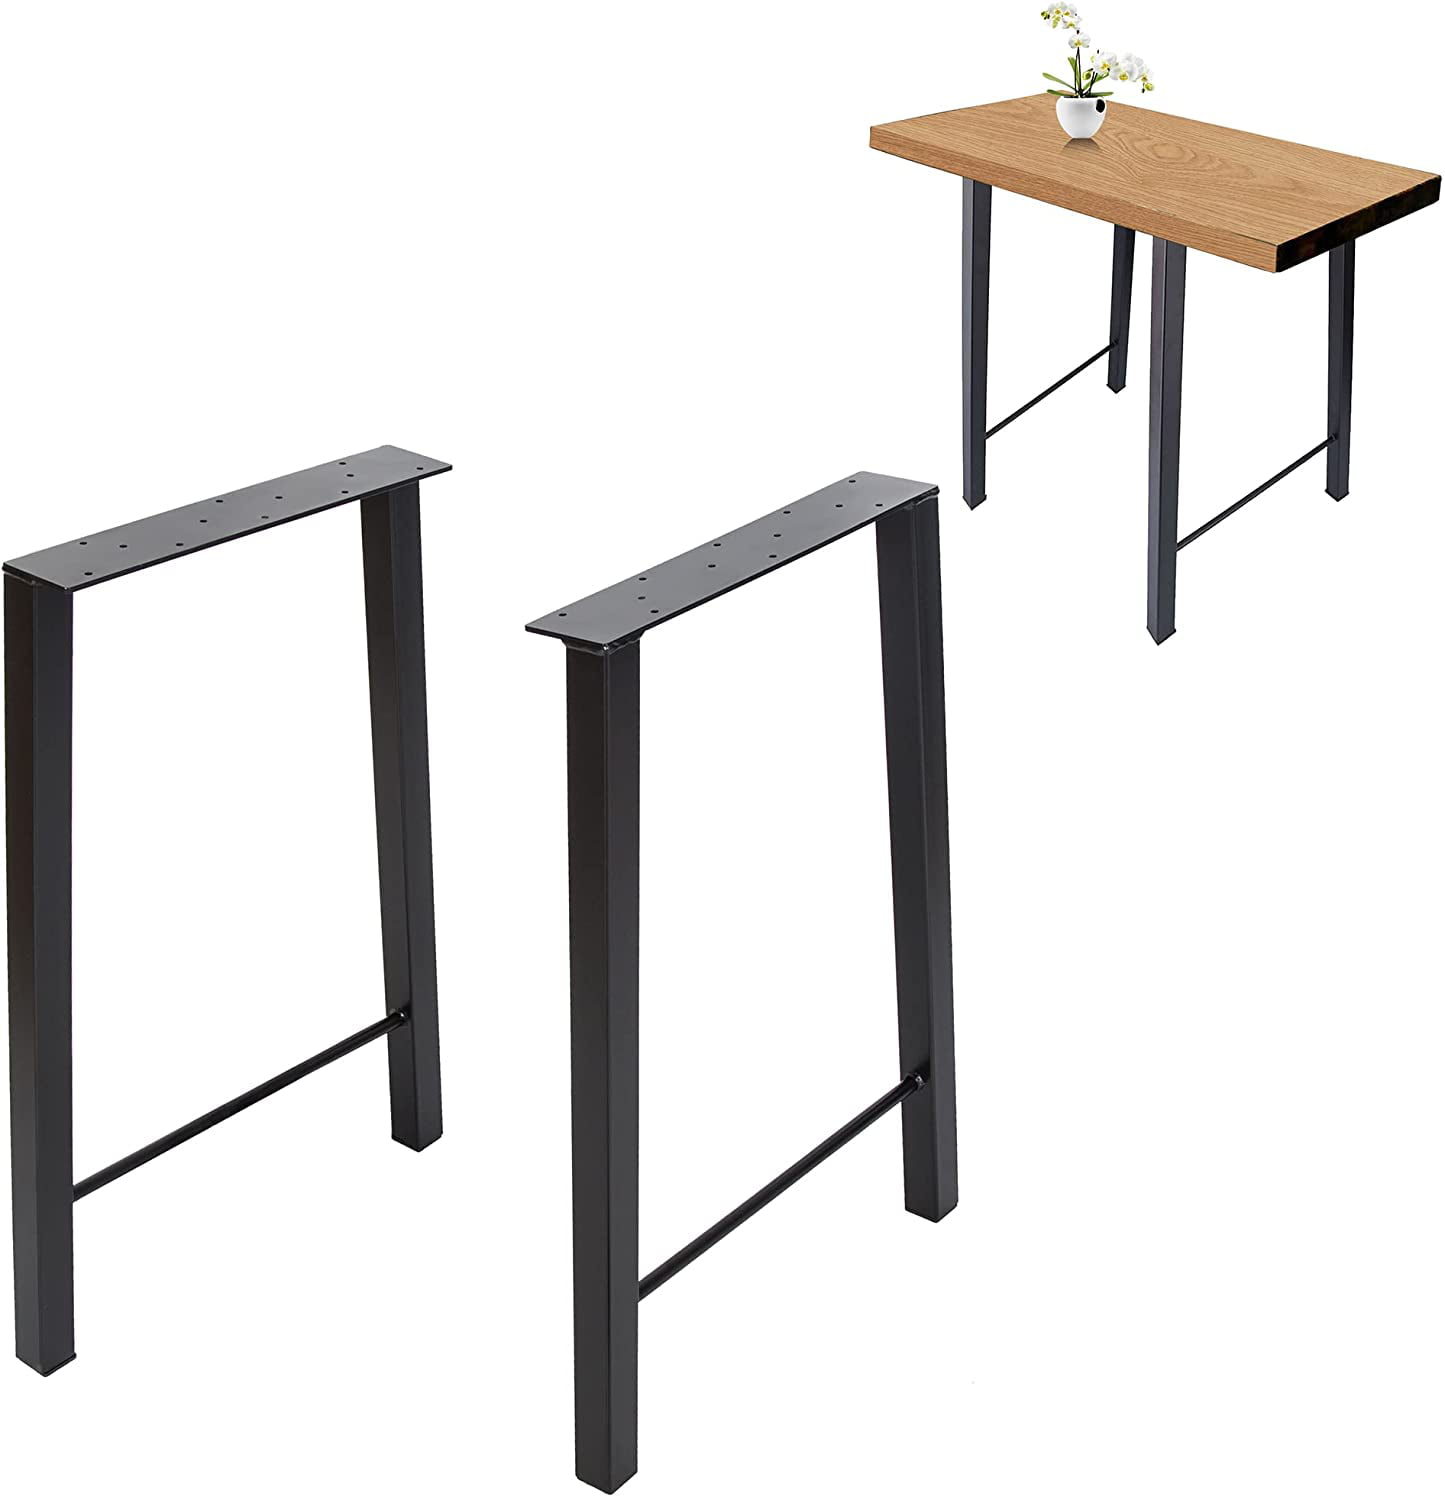 Bench 2PCS Industrial Steel Table Legs Furniture Stand for Dining/Bench/Office/Desk 